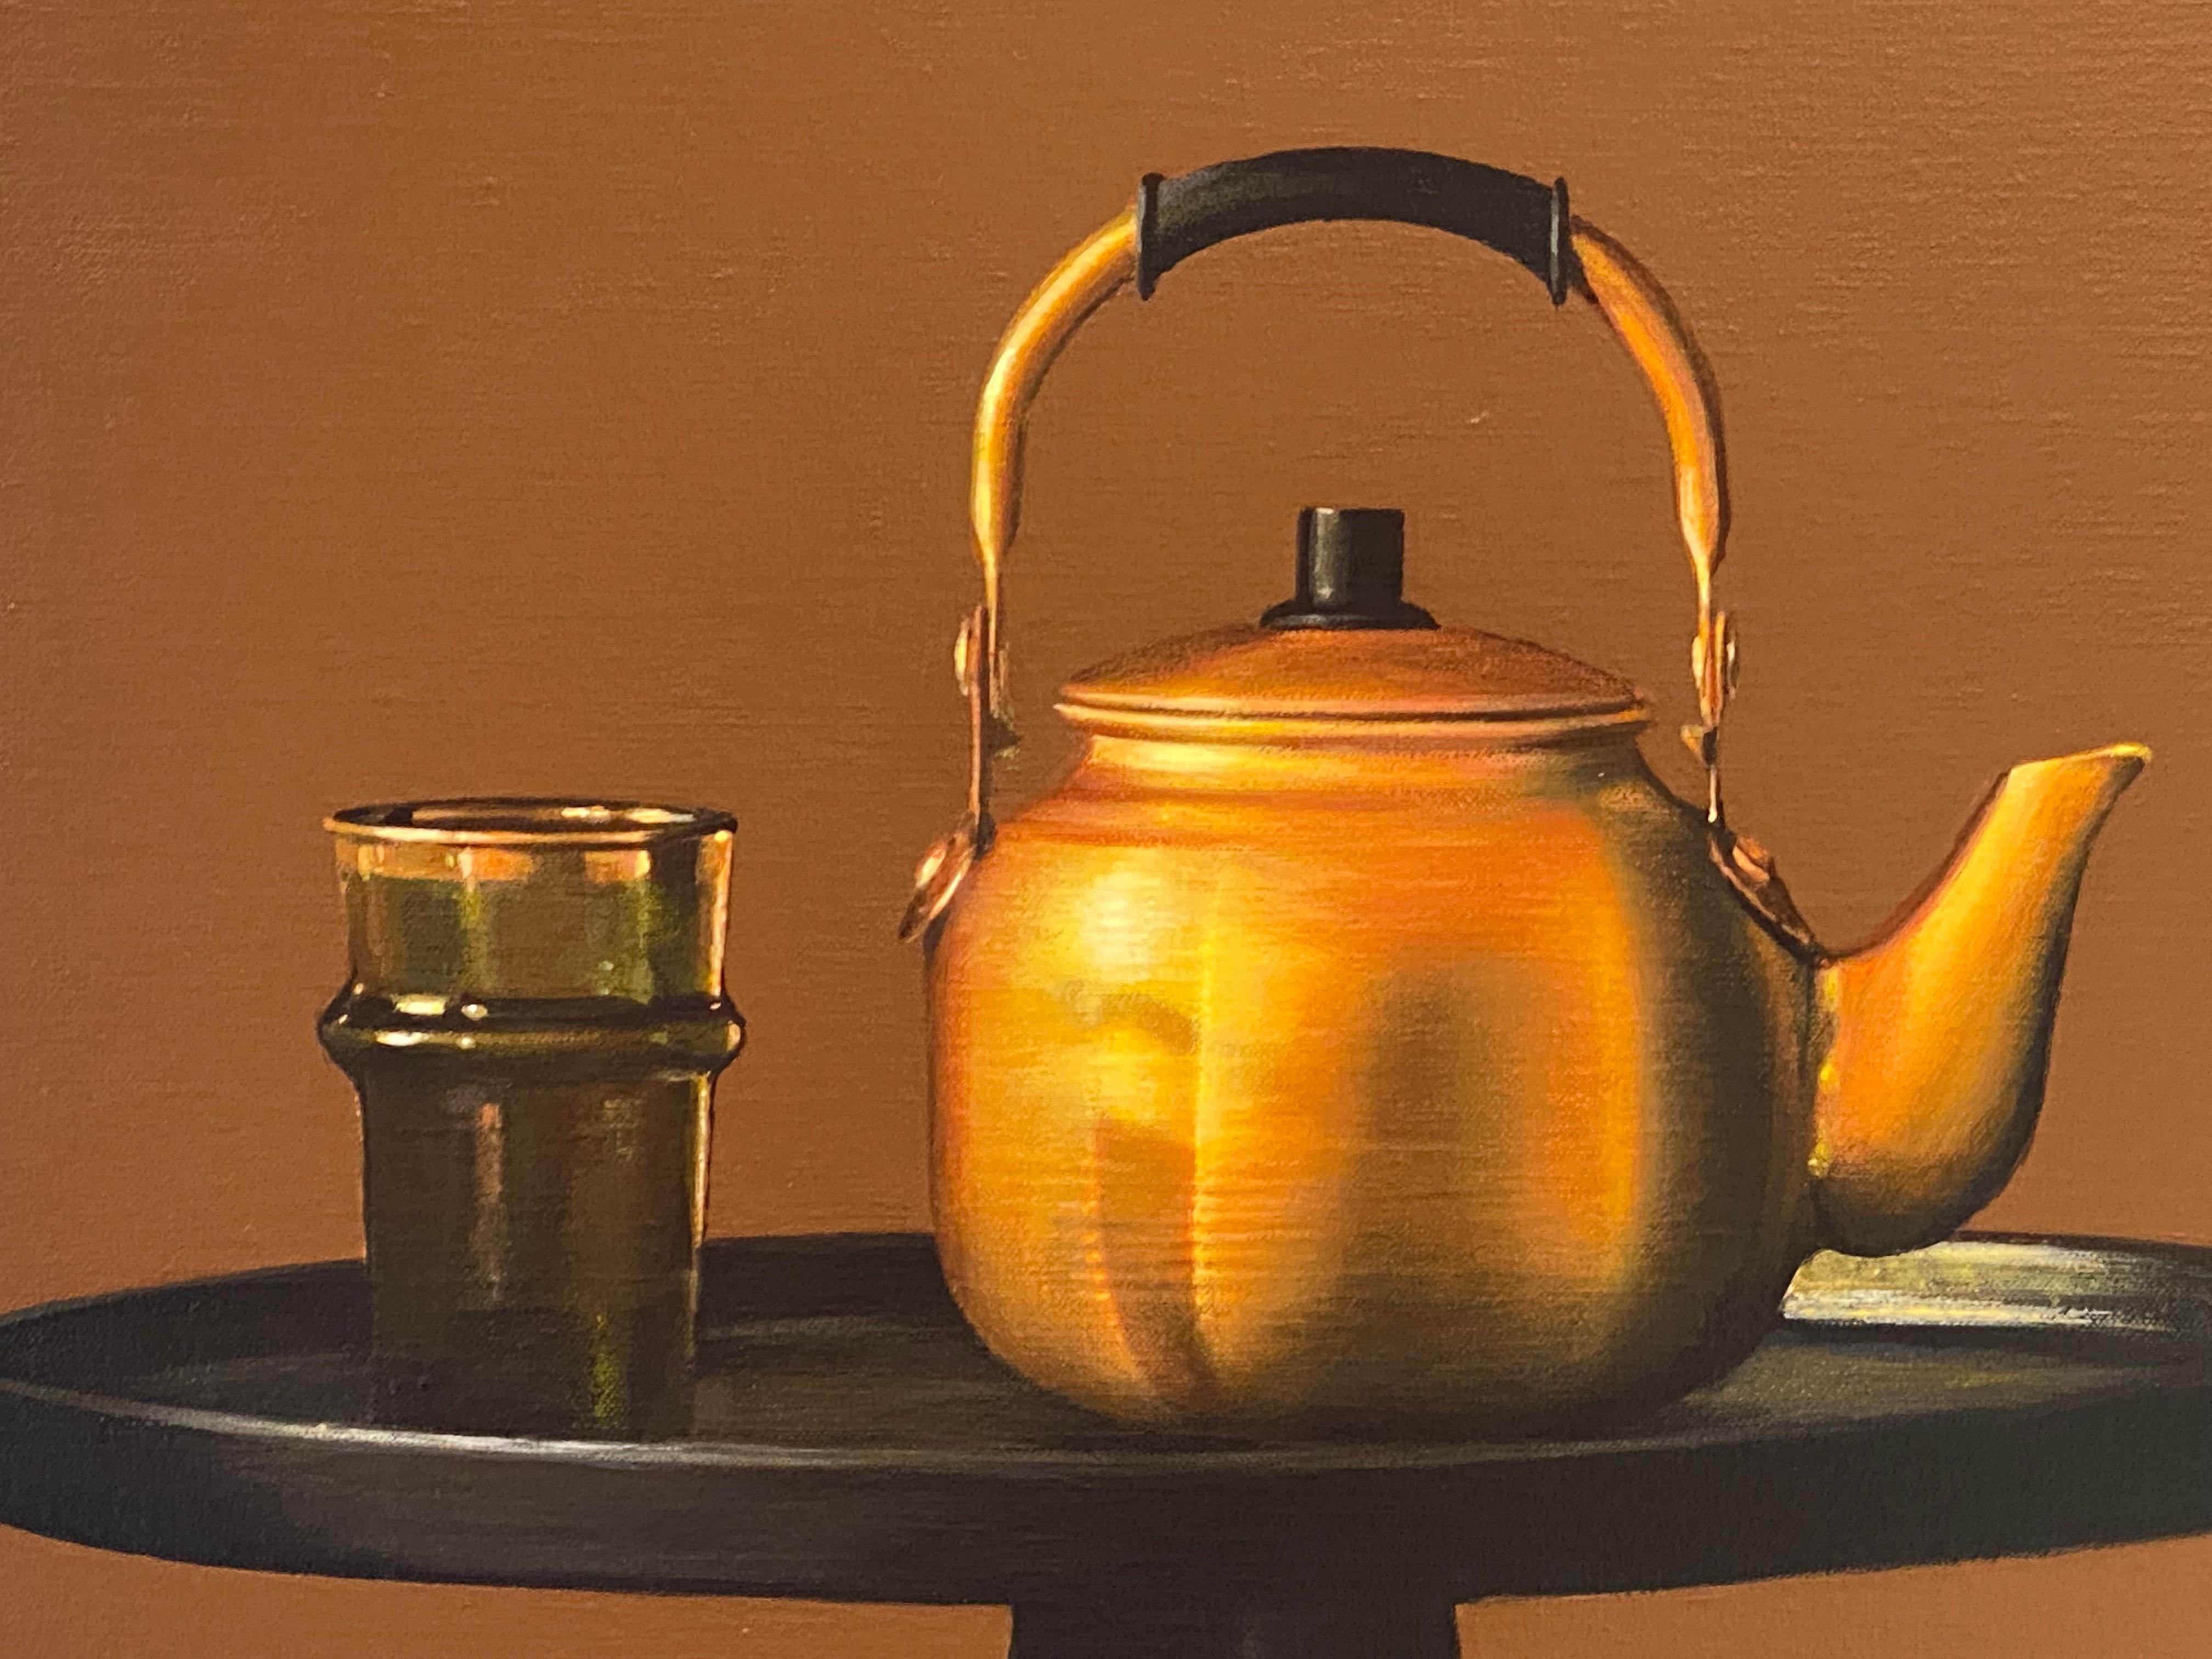 Chair with Golden Tea Pot-21st Contemporary Dutch Realistic Still-life painting  1